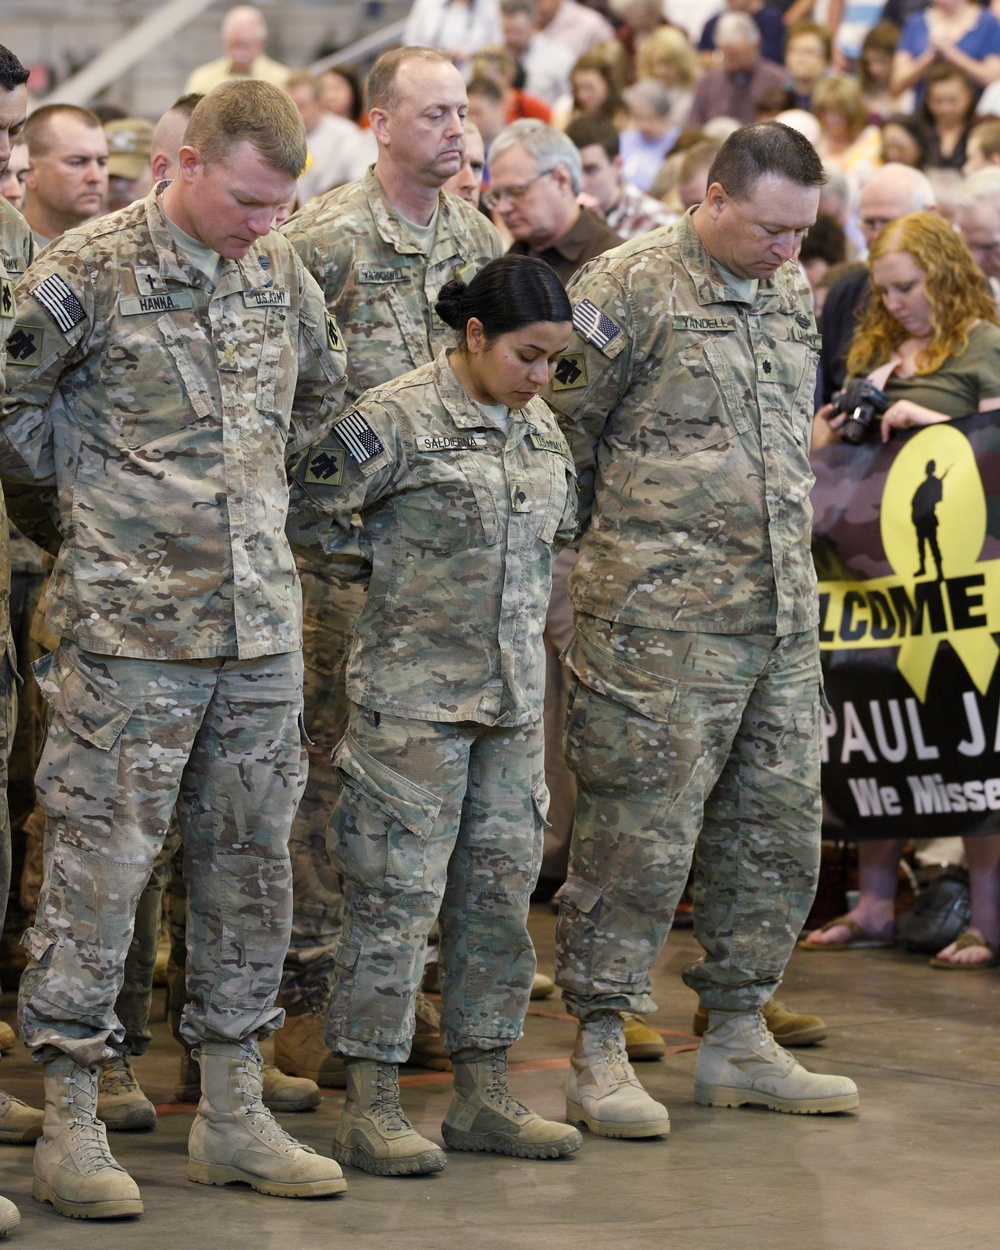 45th IBCT soldiers return to Oklahoma